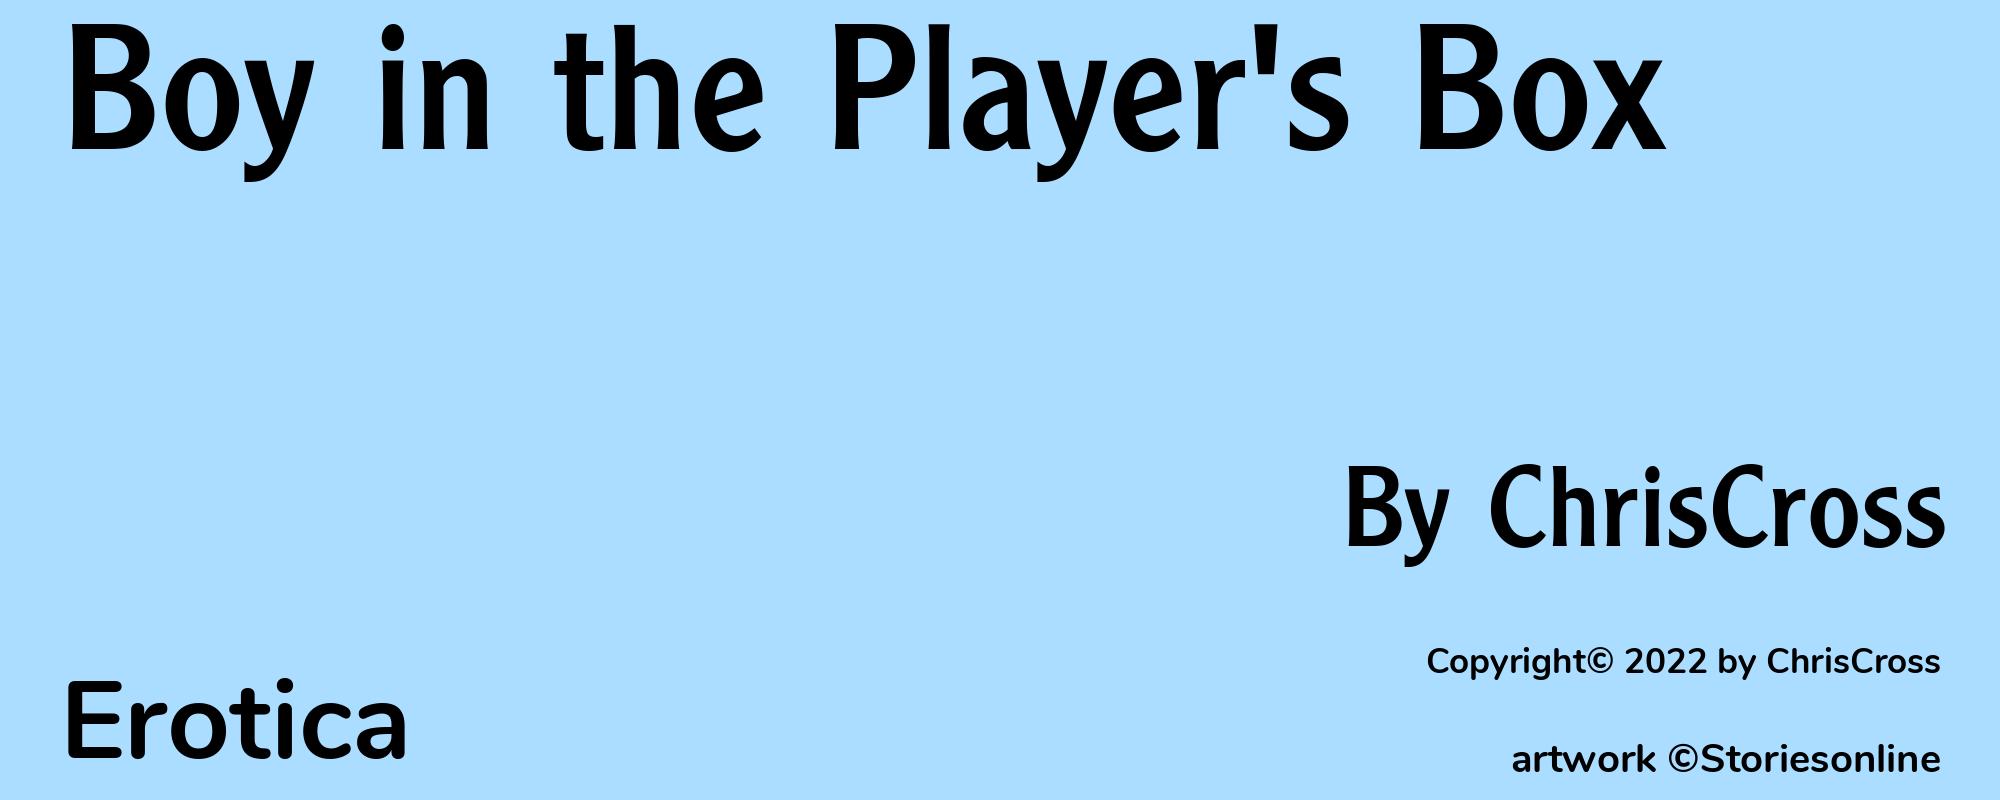 Boy in the Player's Box - Cover